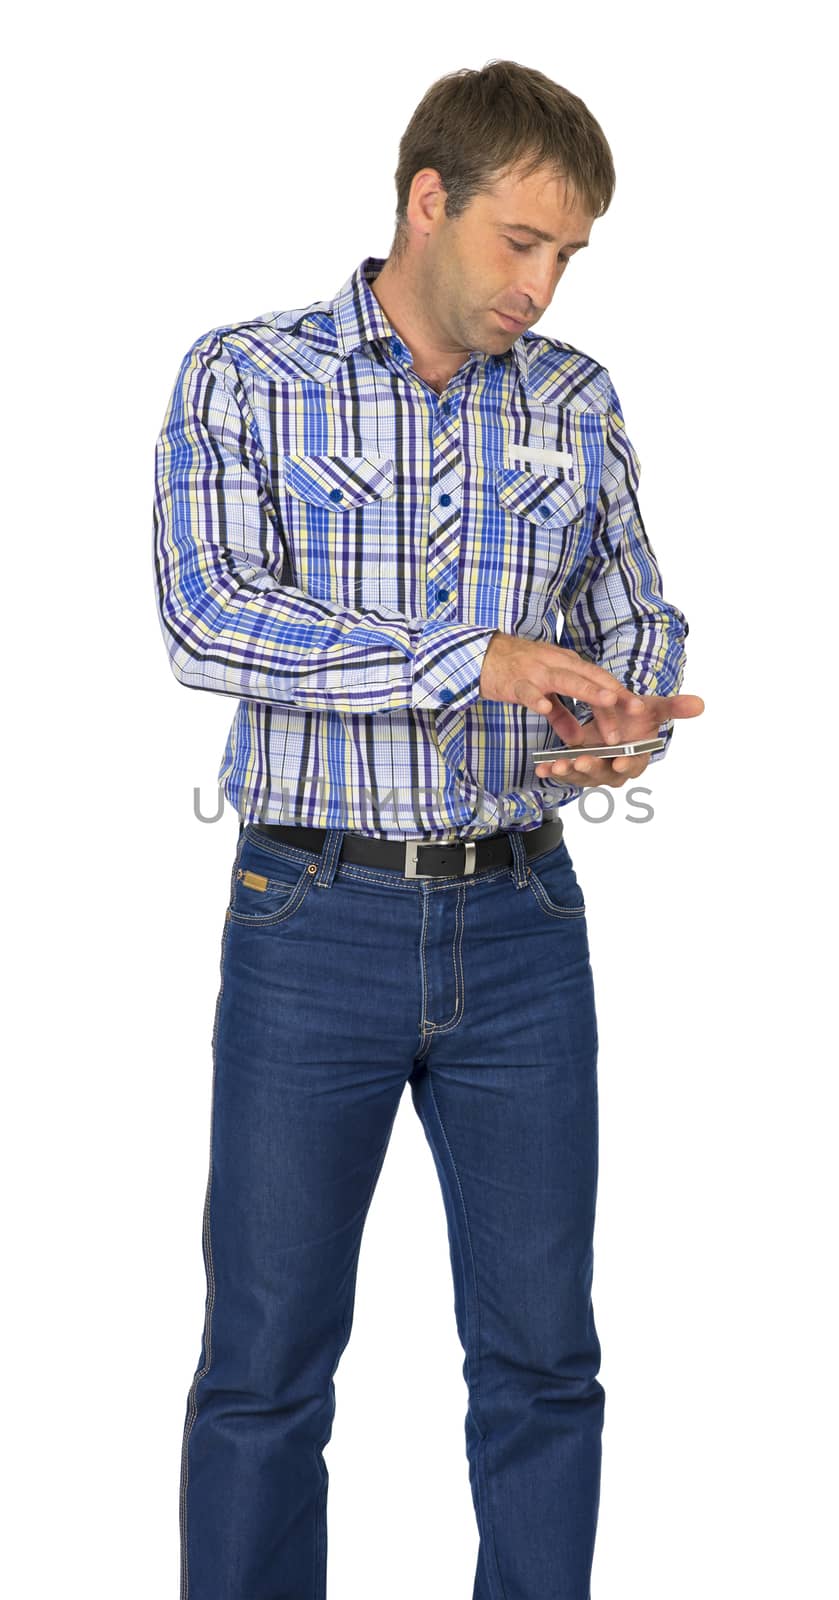 Portrait of man using his smart phone against white background